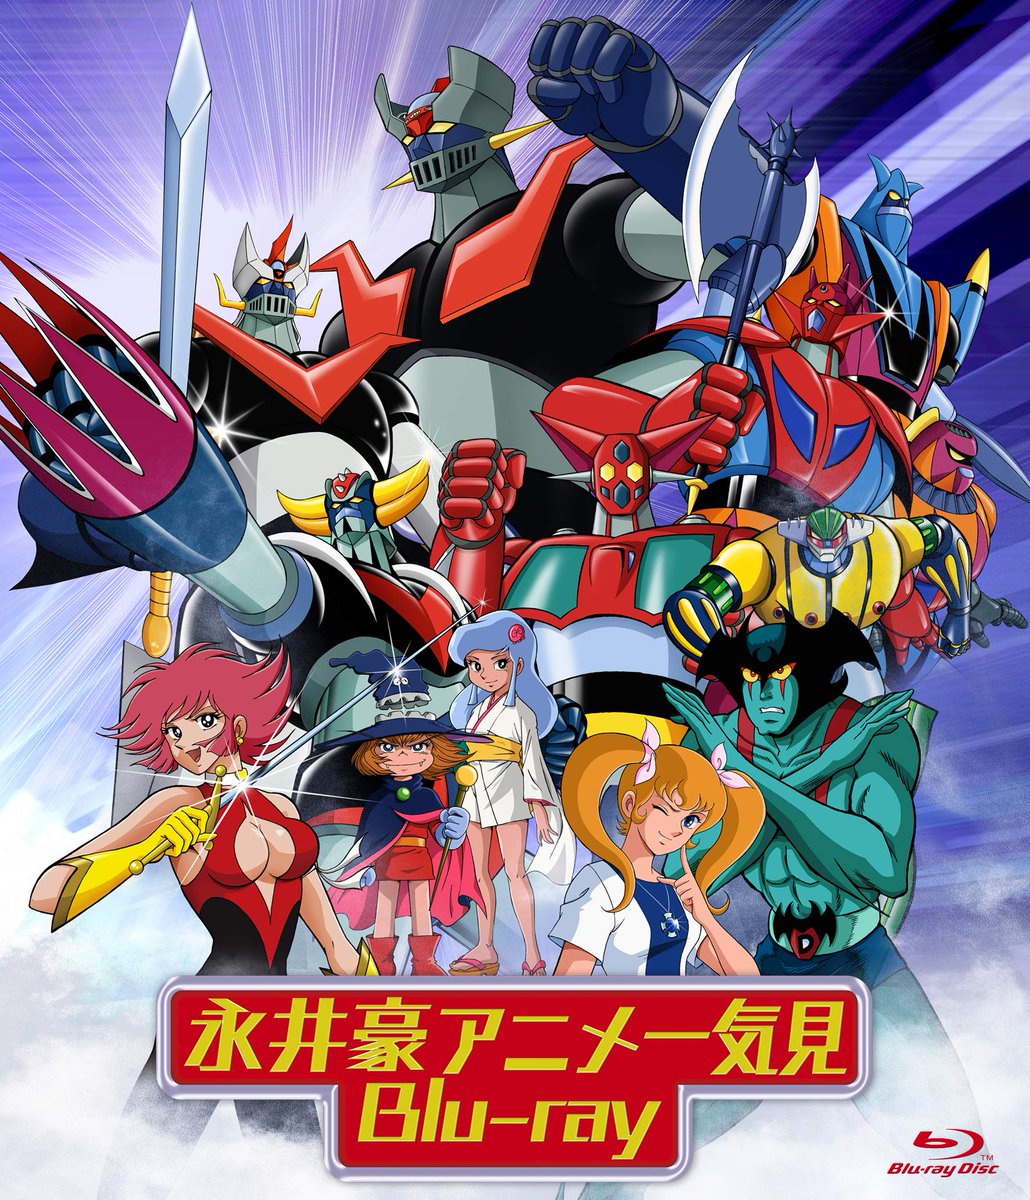 9. Go Nagai Anime Compilation (or Go Nagai Anime Cum as Google Translate is calling it ) [Select episodes from various Toei adaptations] (September 2019)Note: Only one was HD scanned (Mazinger Z) and one was upscaled (Devilman) so for the former, this is a downgrade.